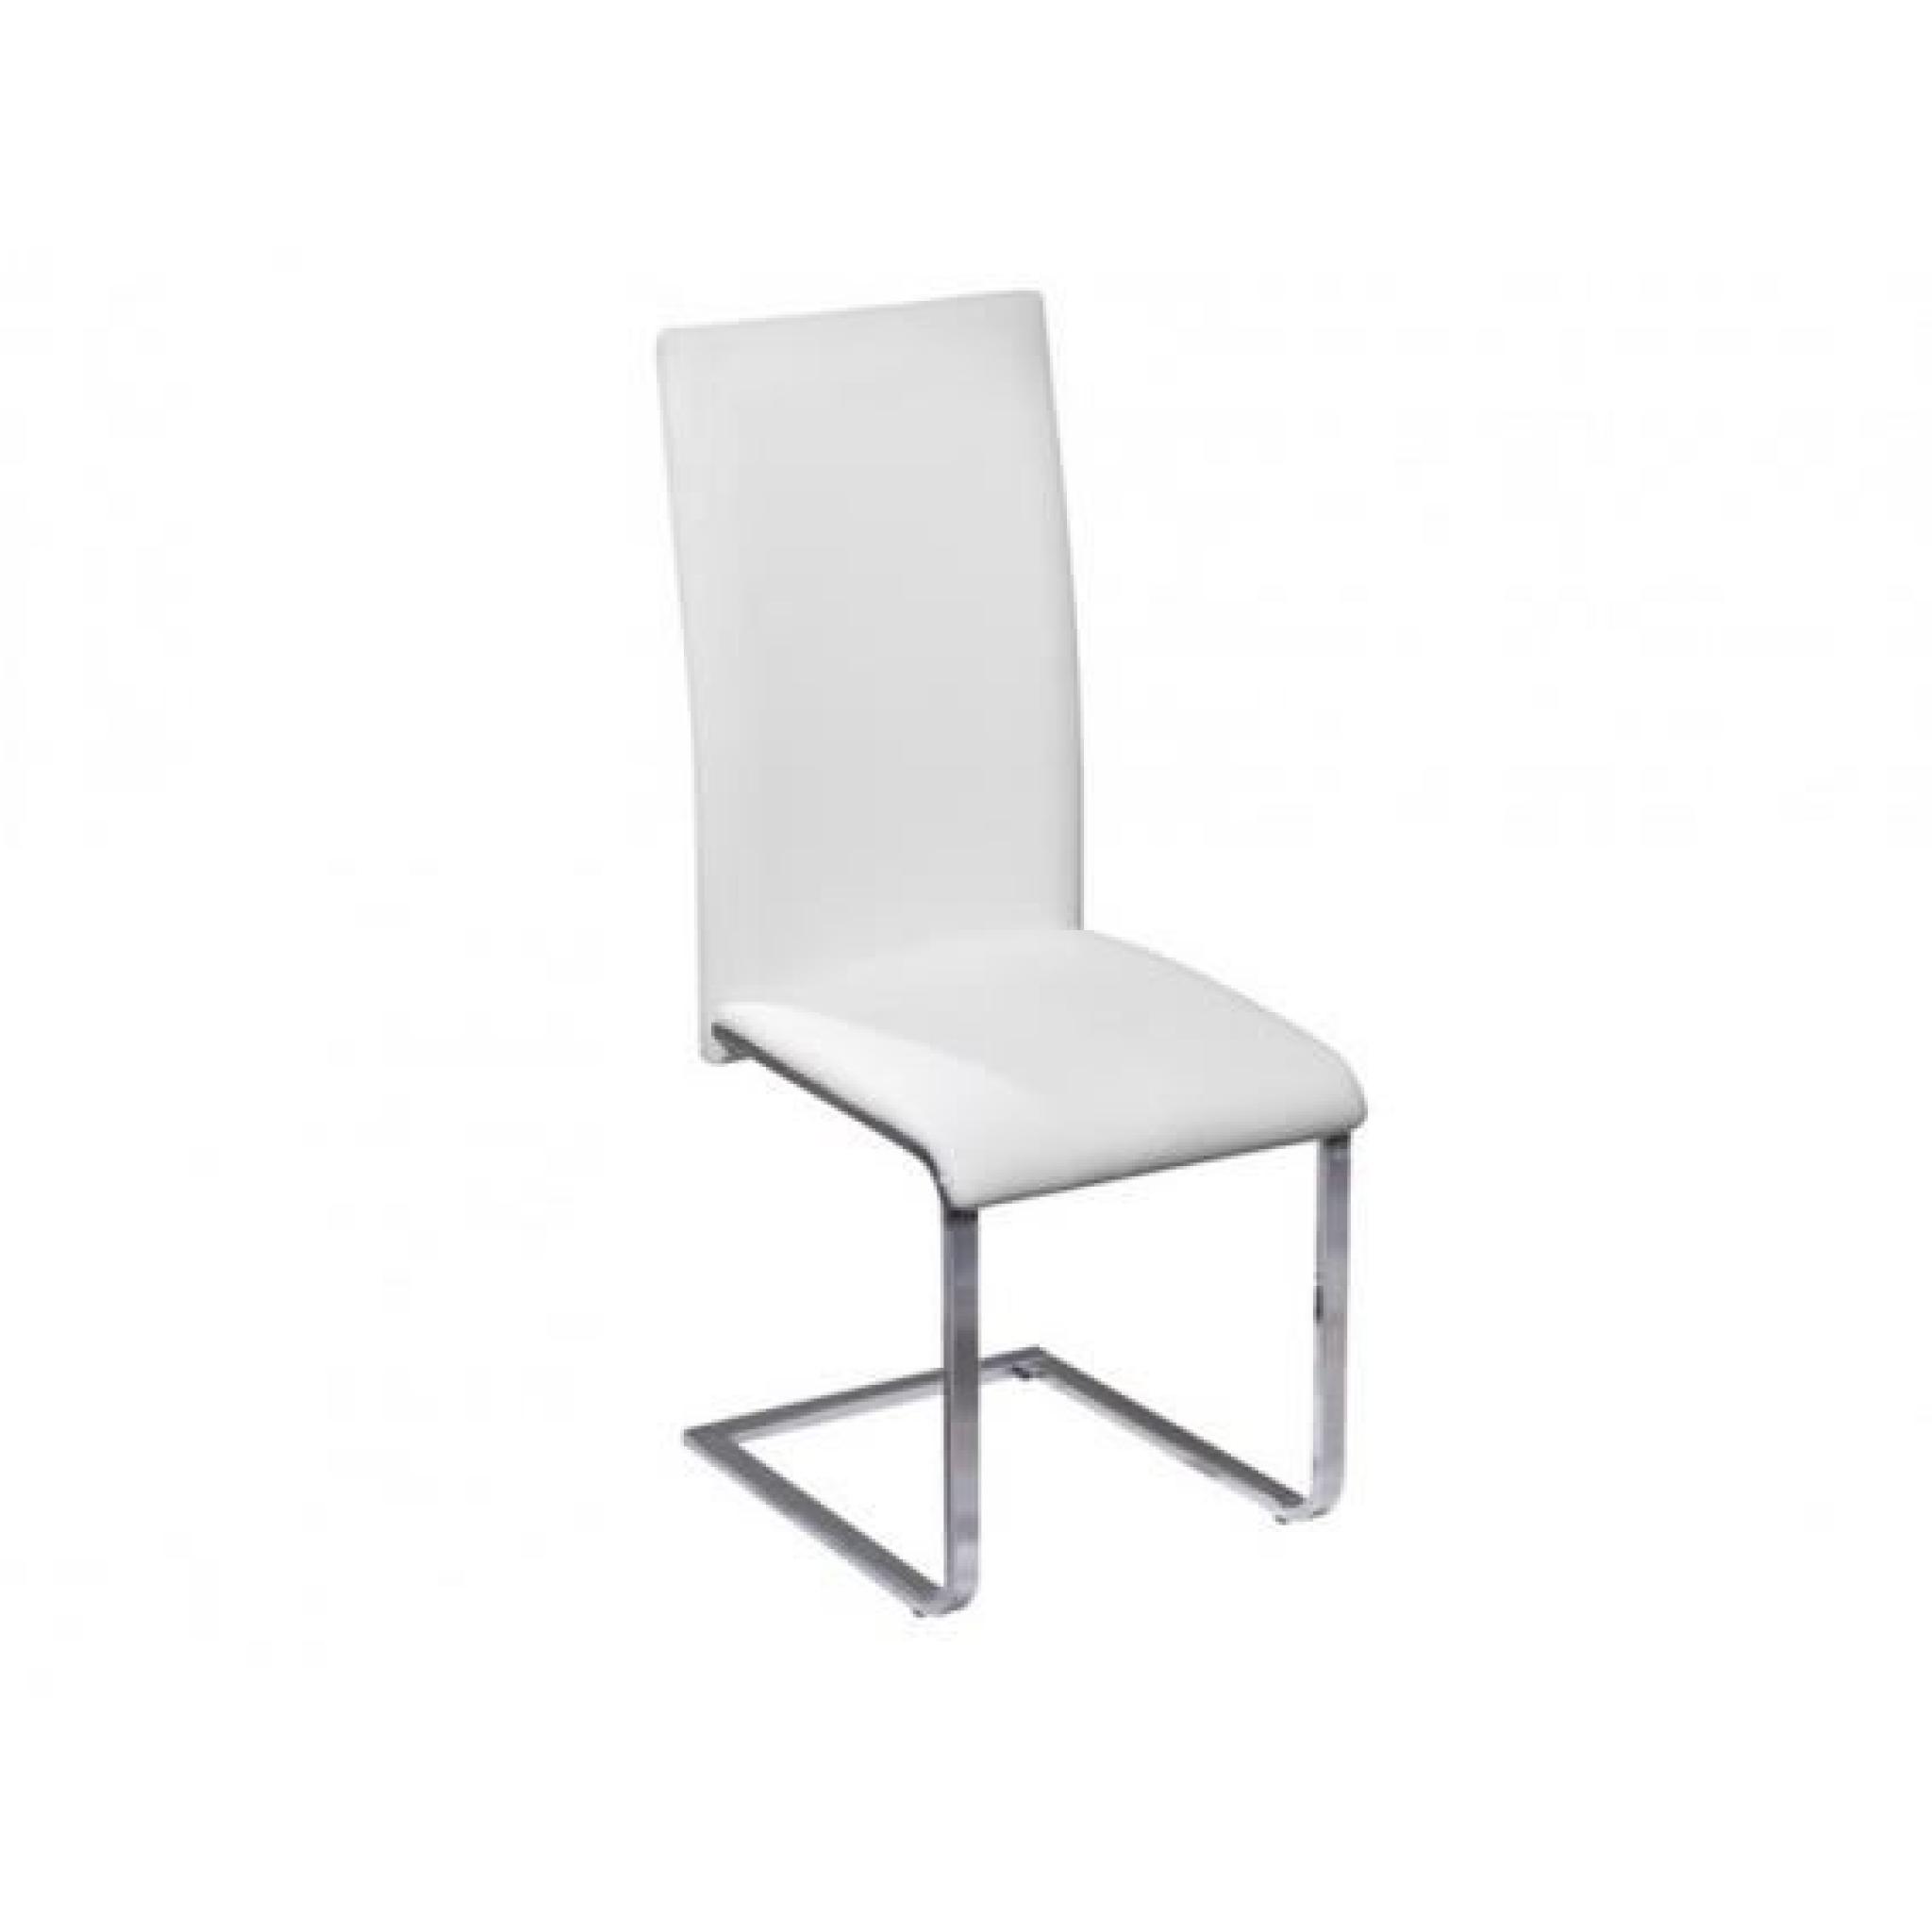 Brooklyn - Lot 4 Chaises Blanches pas cher